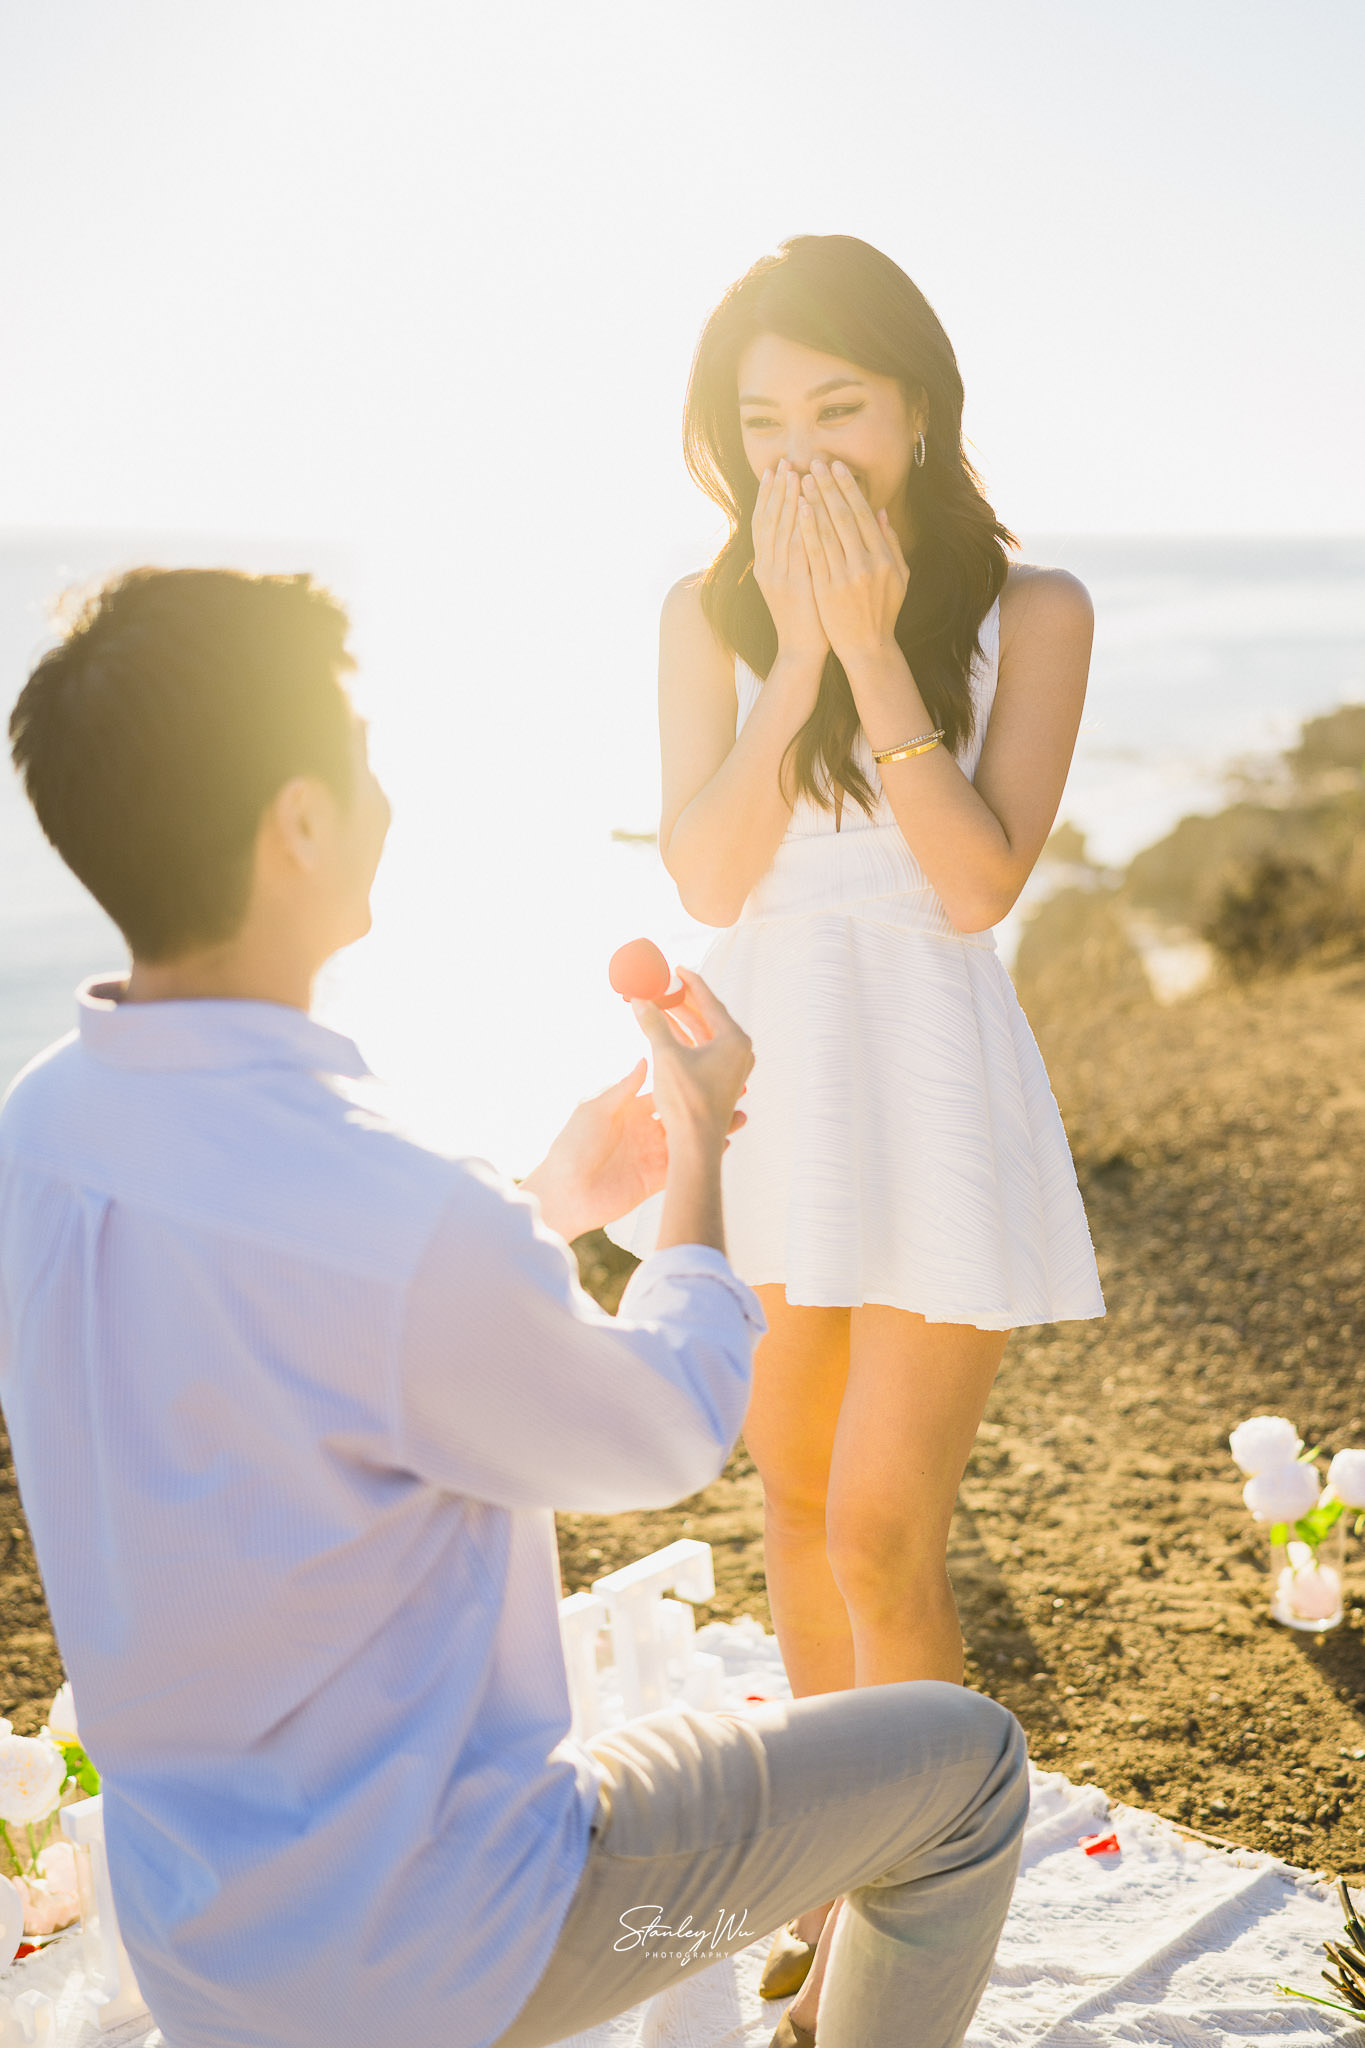 Man proposing to his fiance atop the cliffs in Malibu, fiance is pleasantly surprised